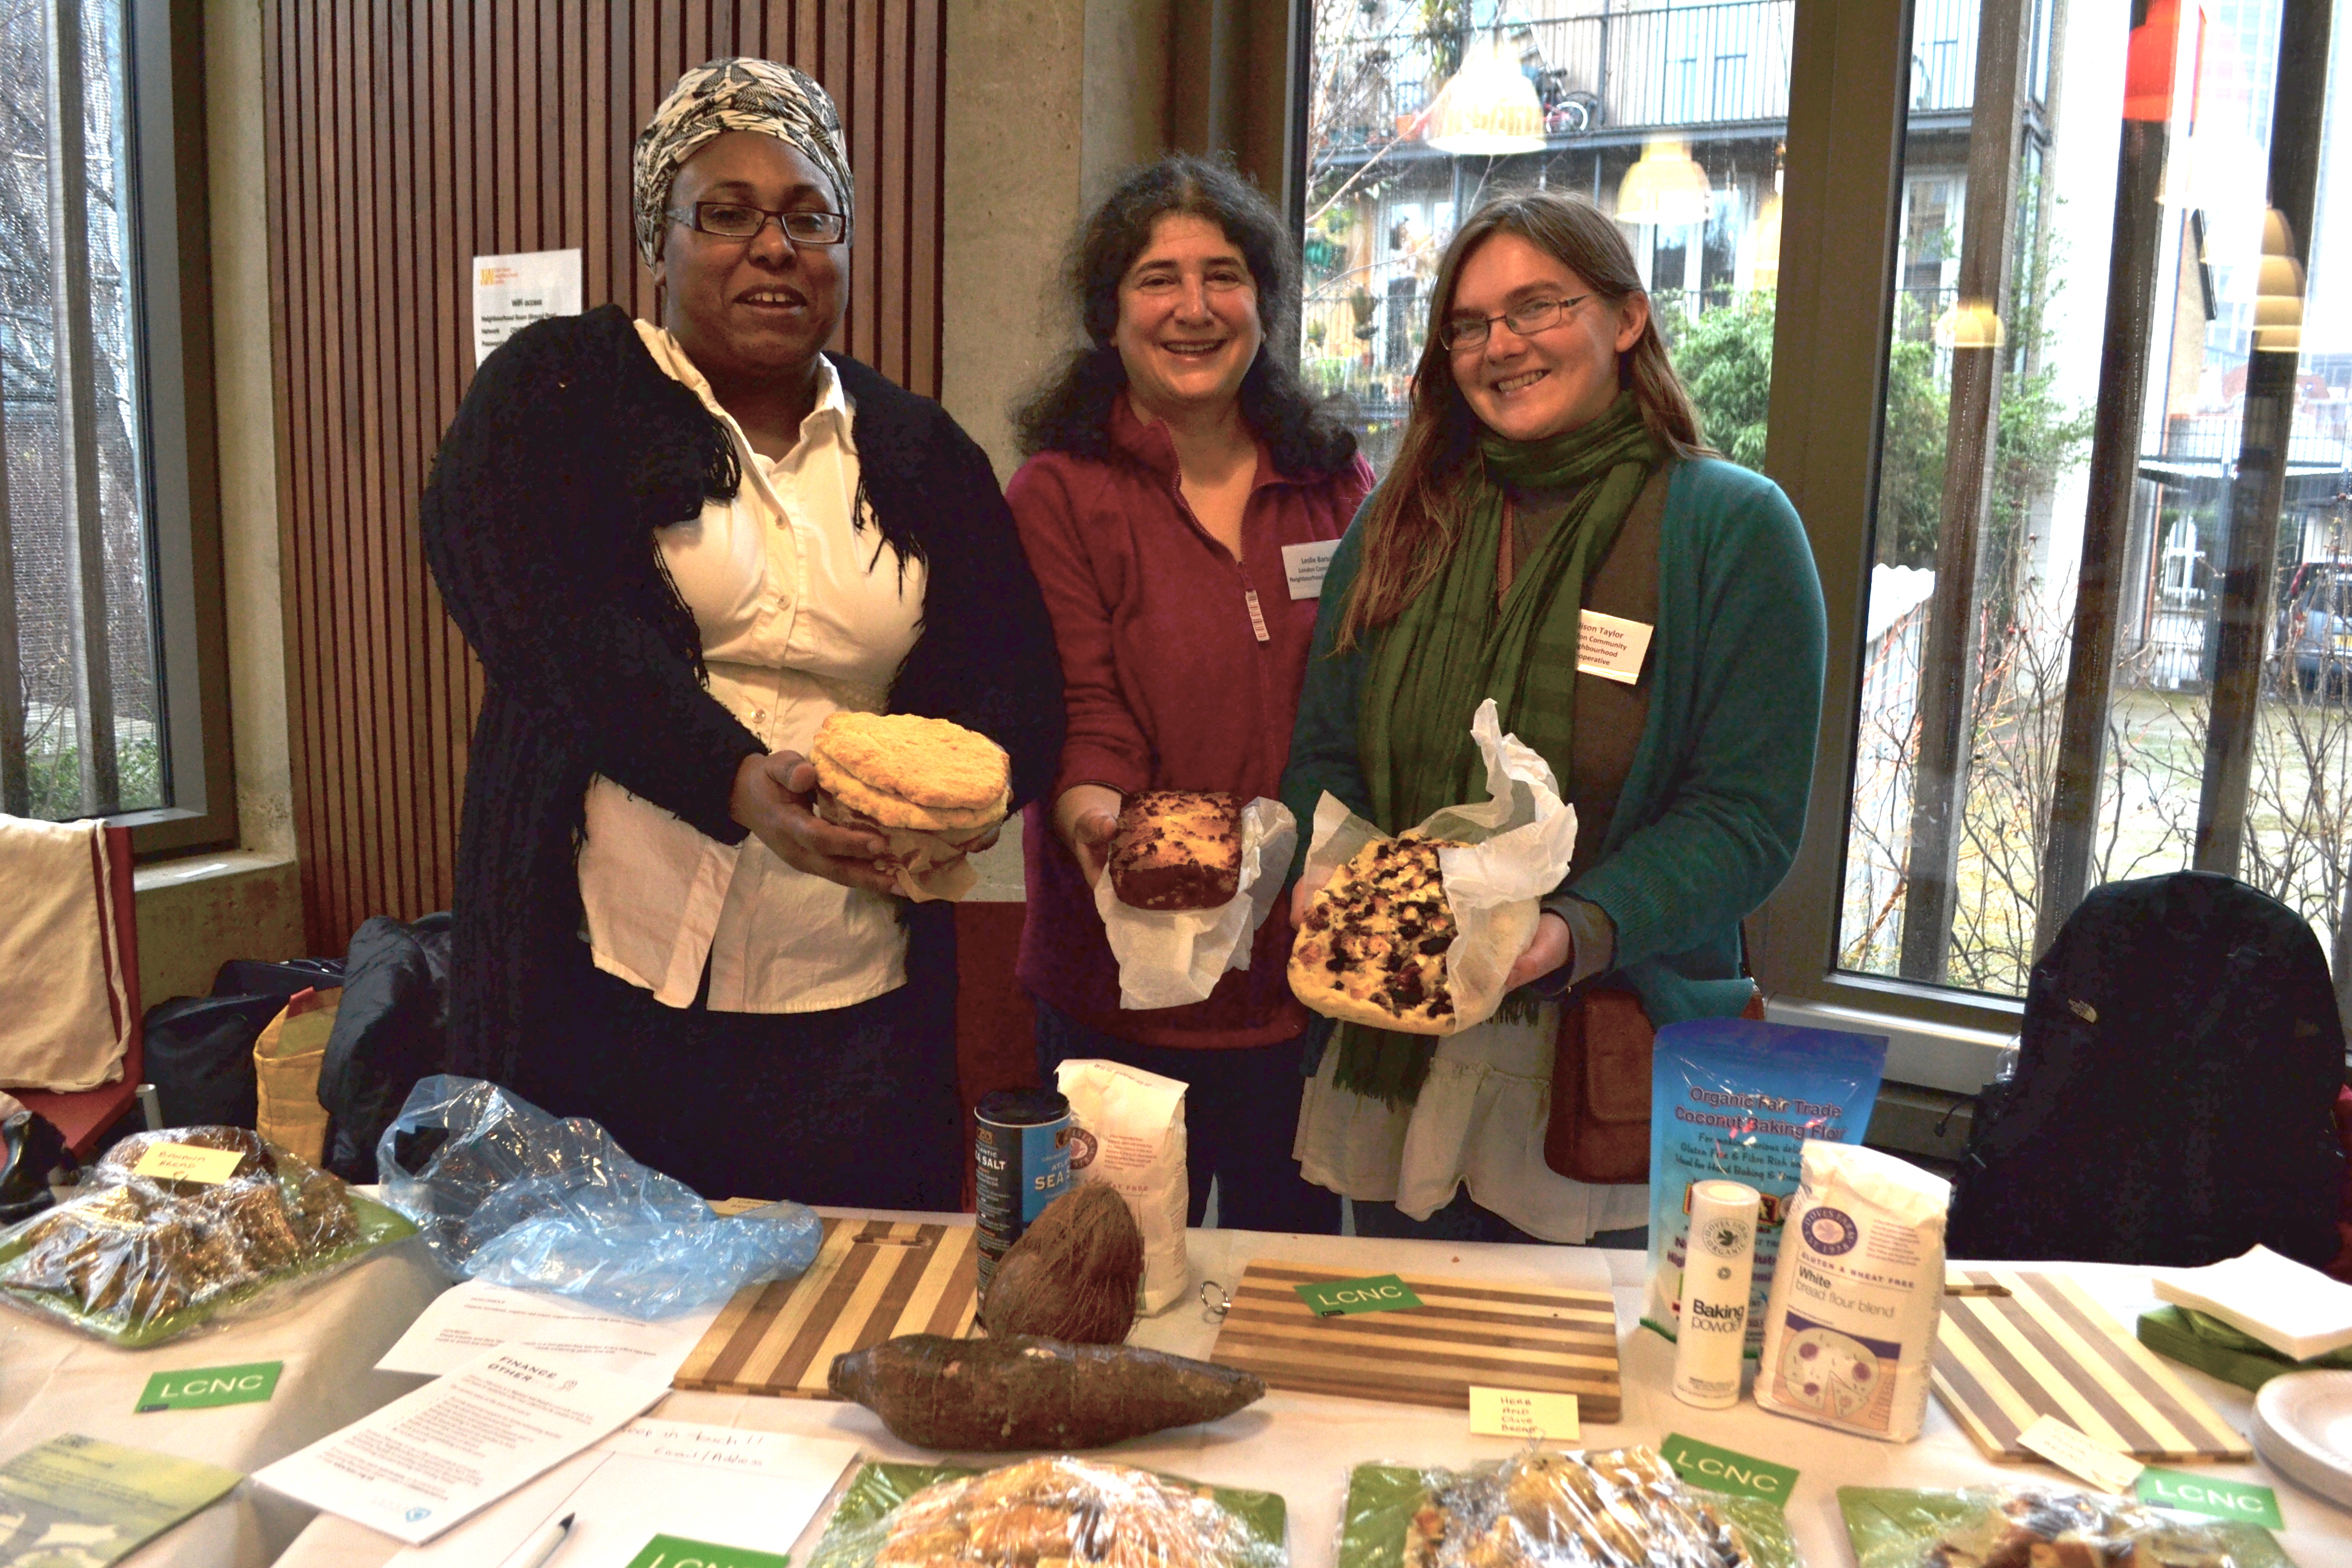 Dee Woods, Leslie Barson and Alison Taylor of London Community Neighbourhood Co-operative